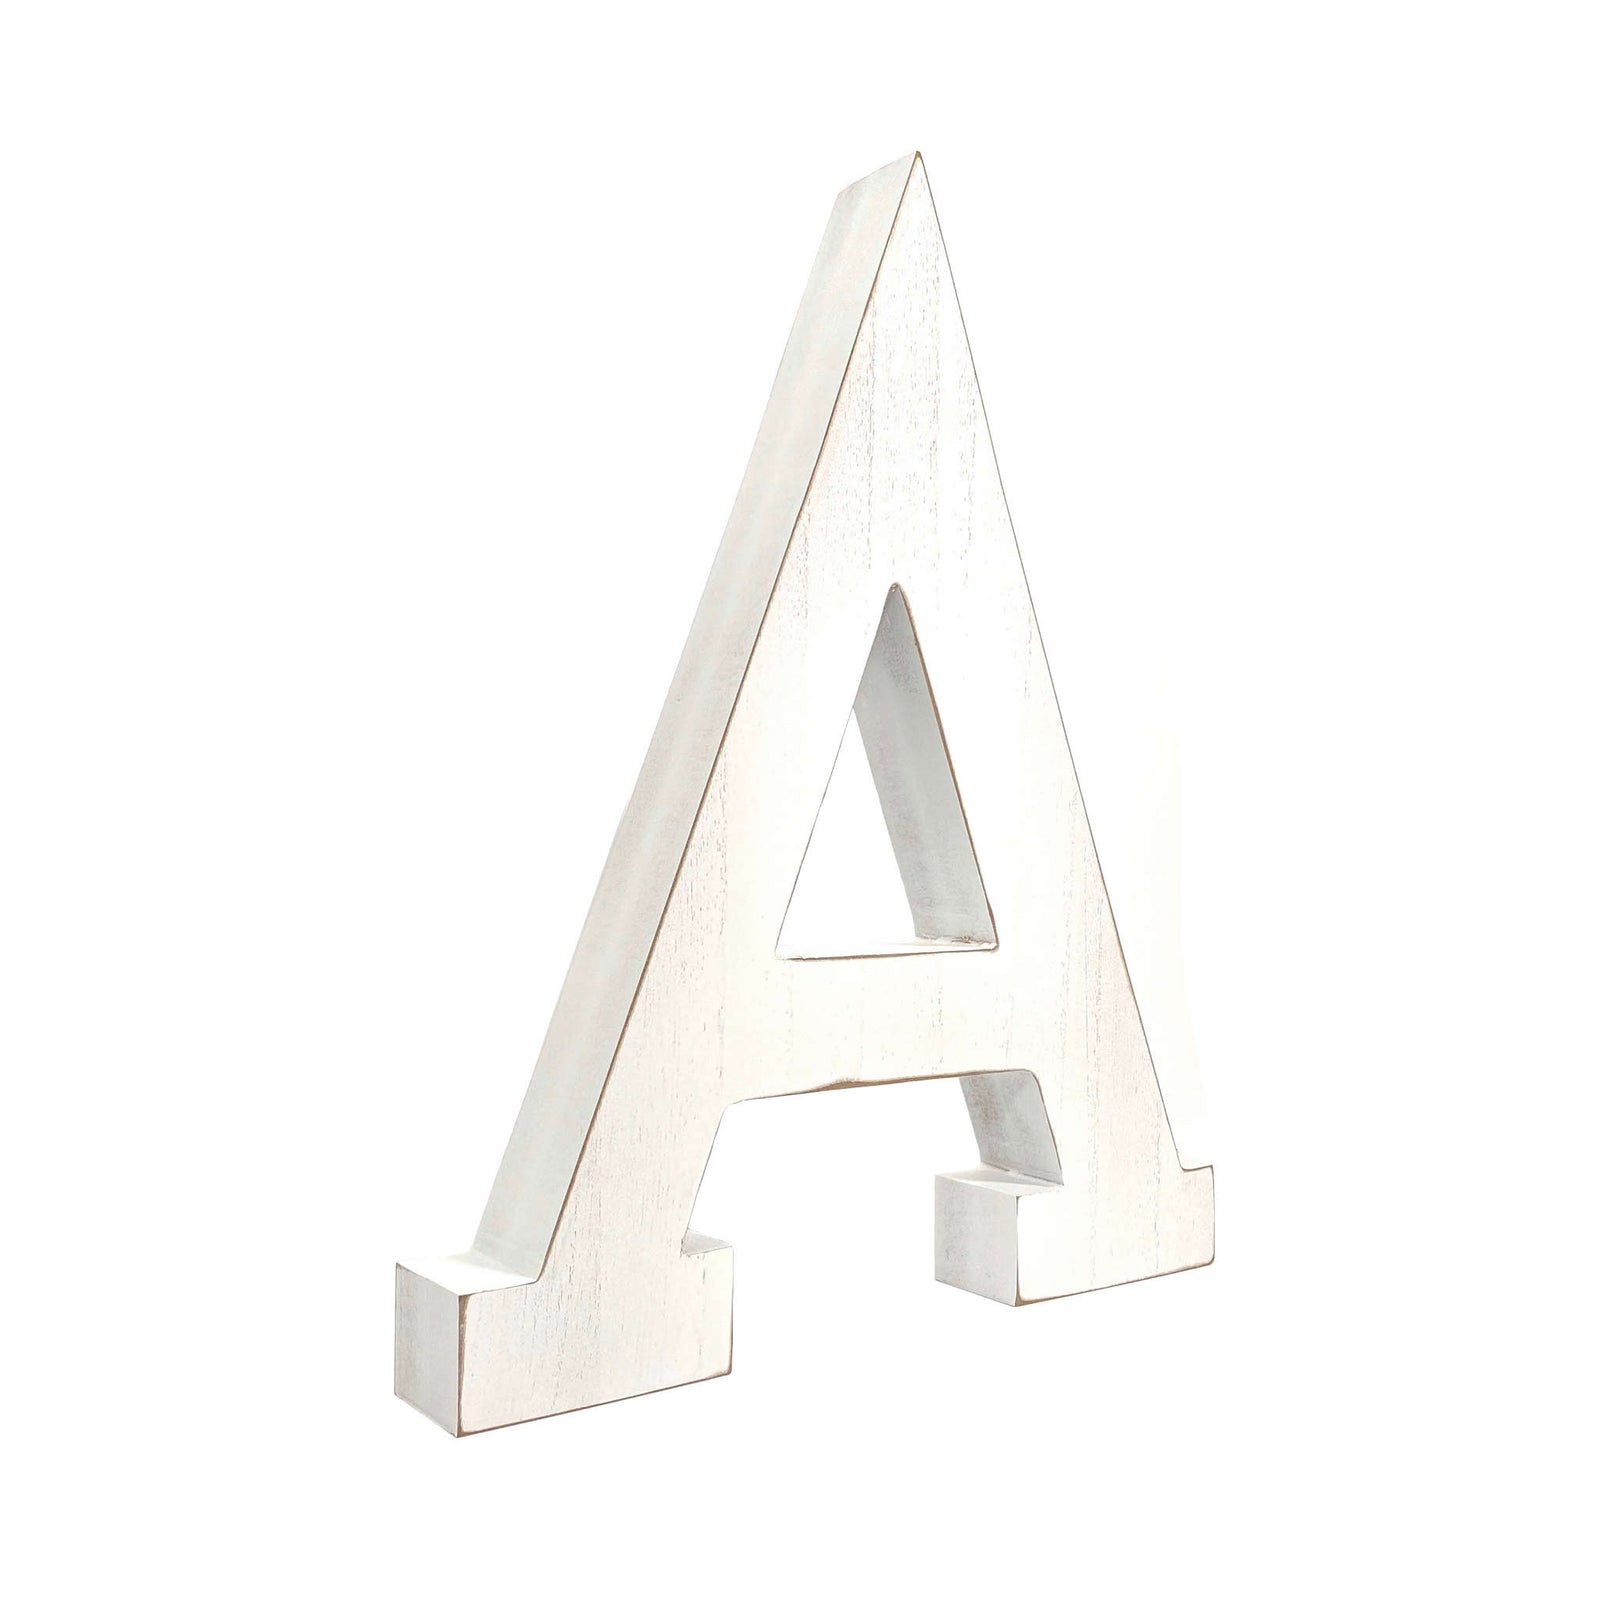 16" Distressed White Wash Wooden Initial Letter A Sculpture